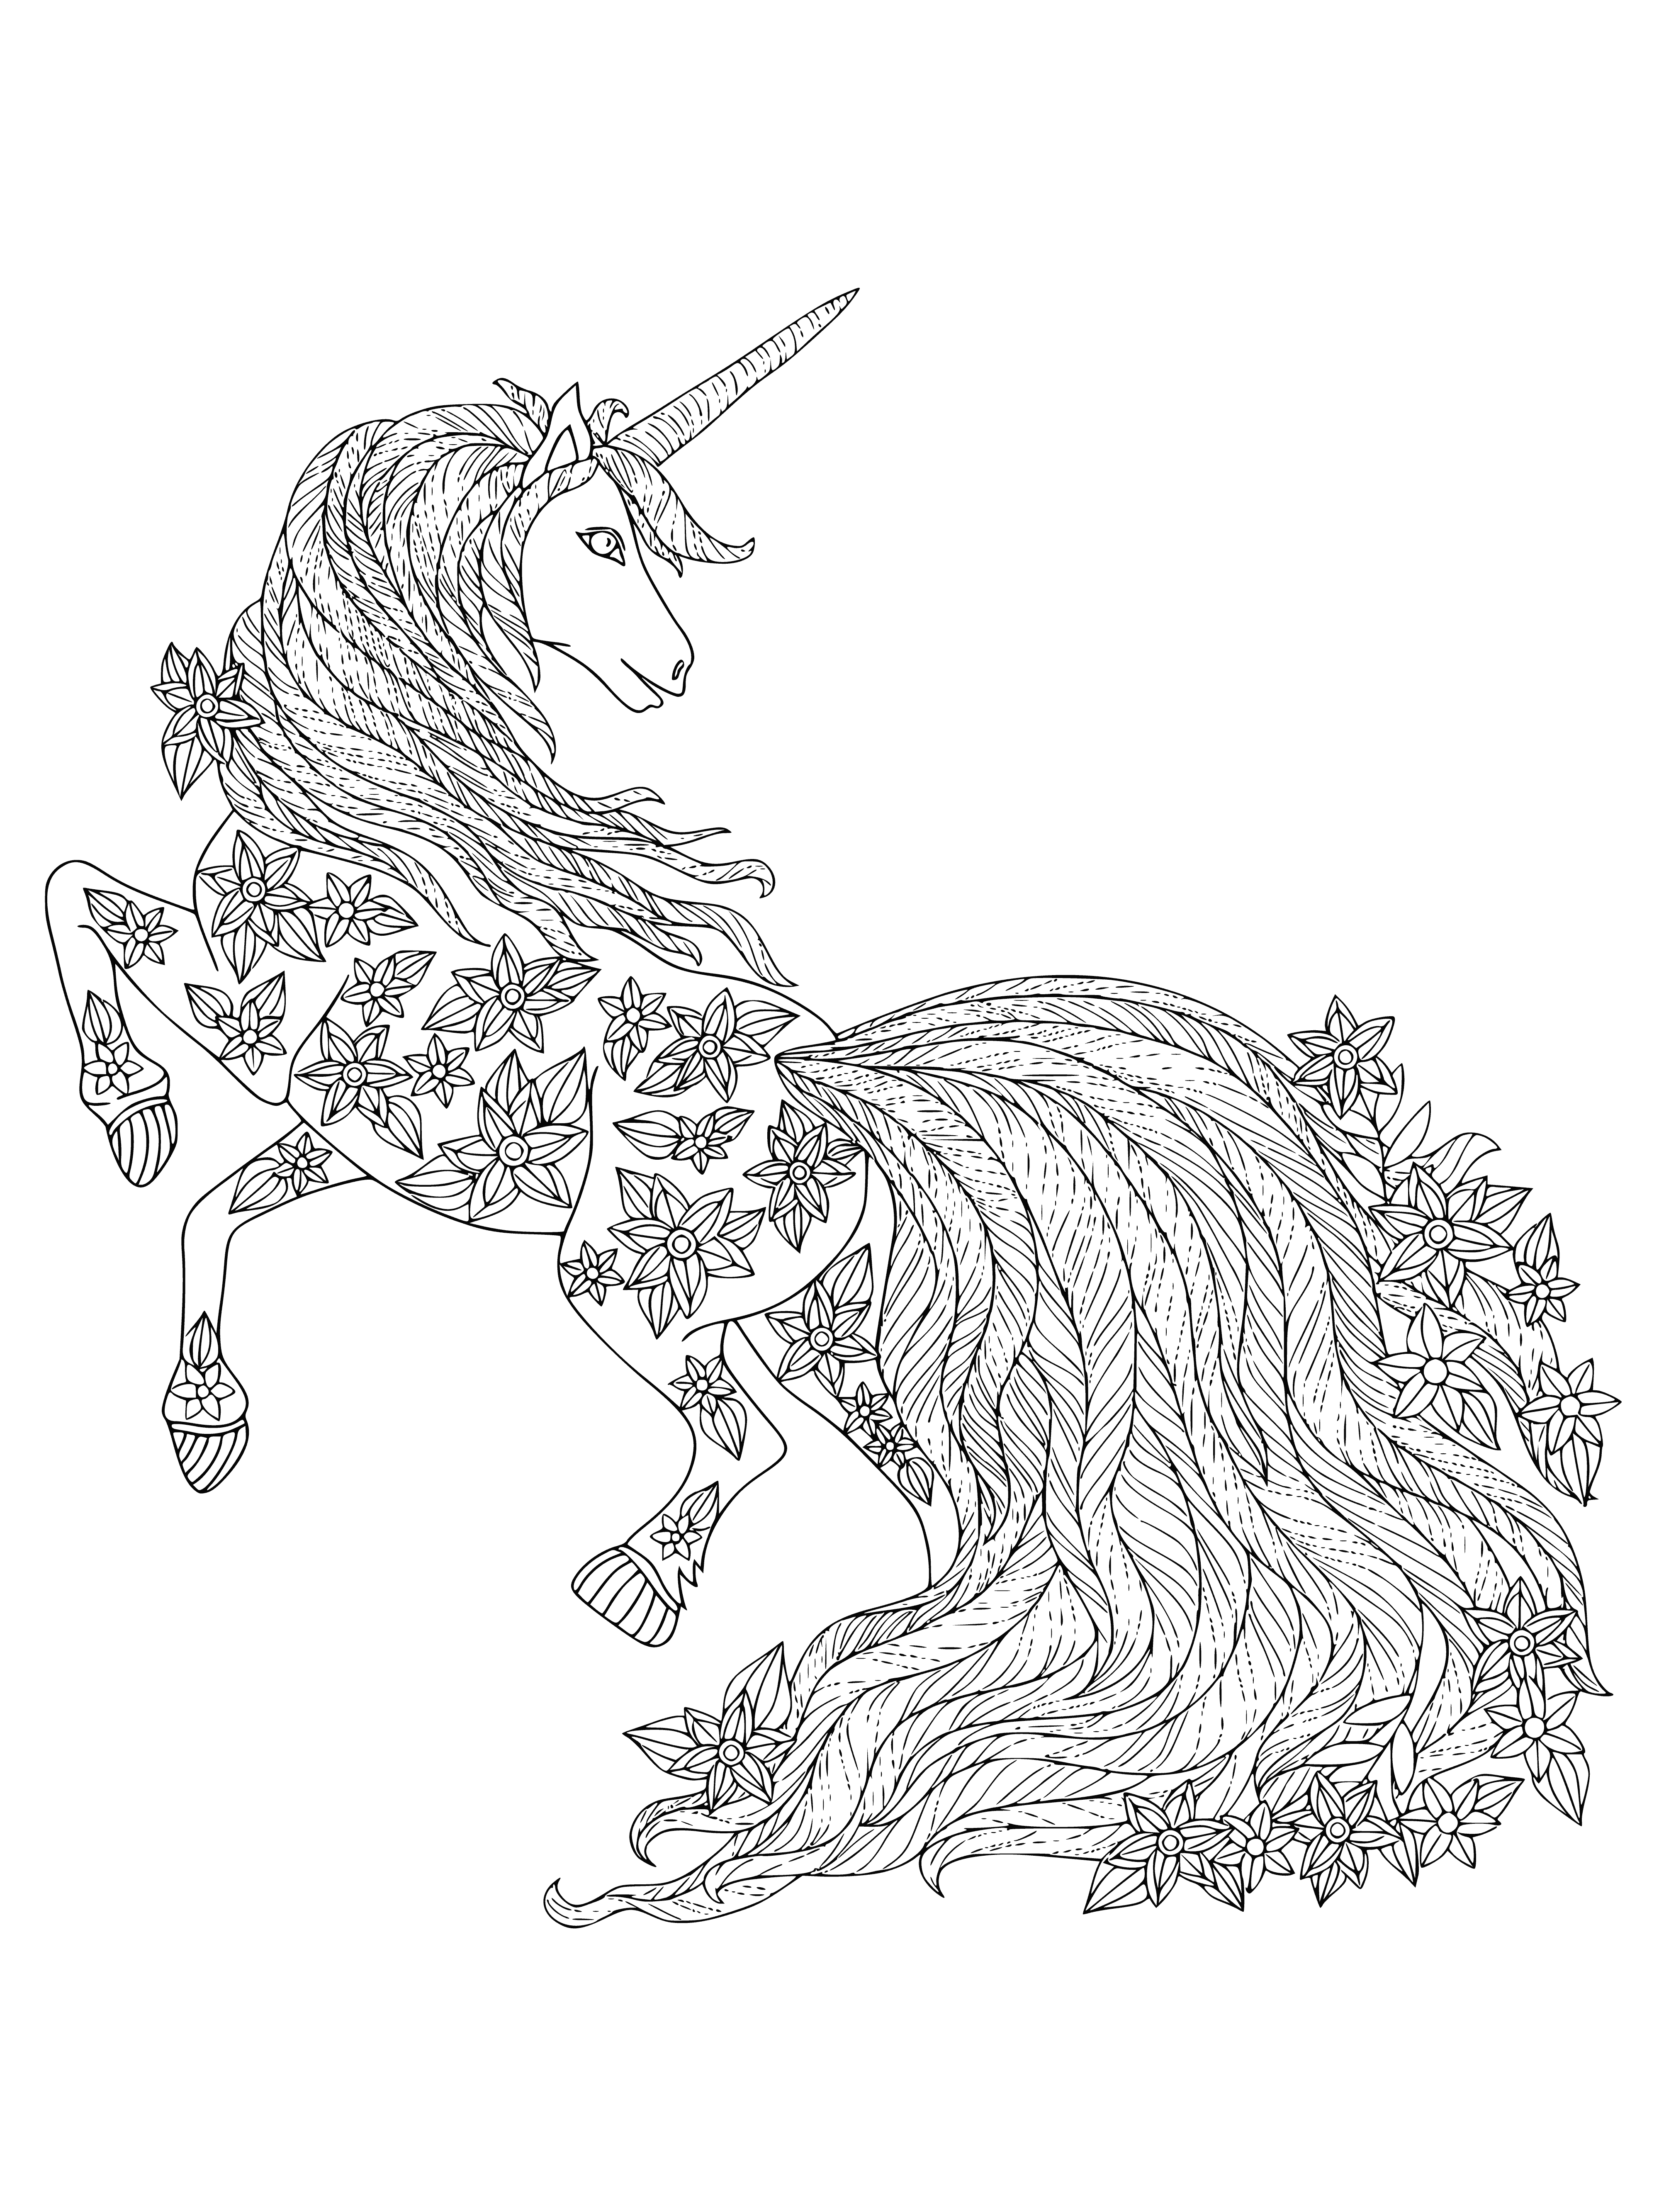 coloring page: Beautiful detailed unicorn stands in a grassy field with flowers, long purple mane & tail & a bright horn. Perfect for anyone who loves unicorns & wants a calming coloring page.